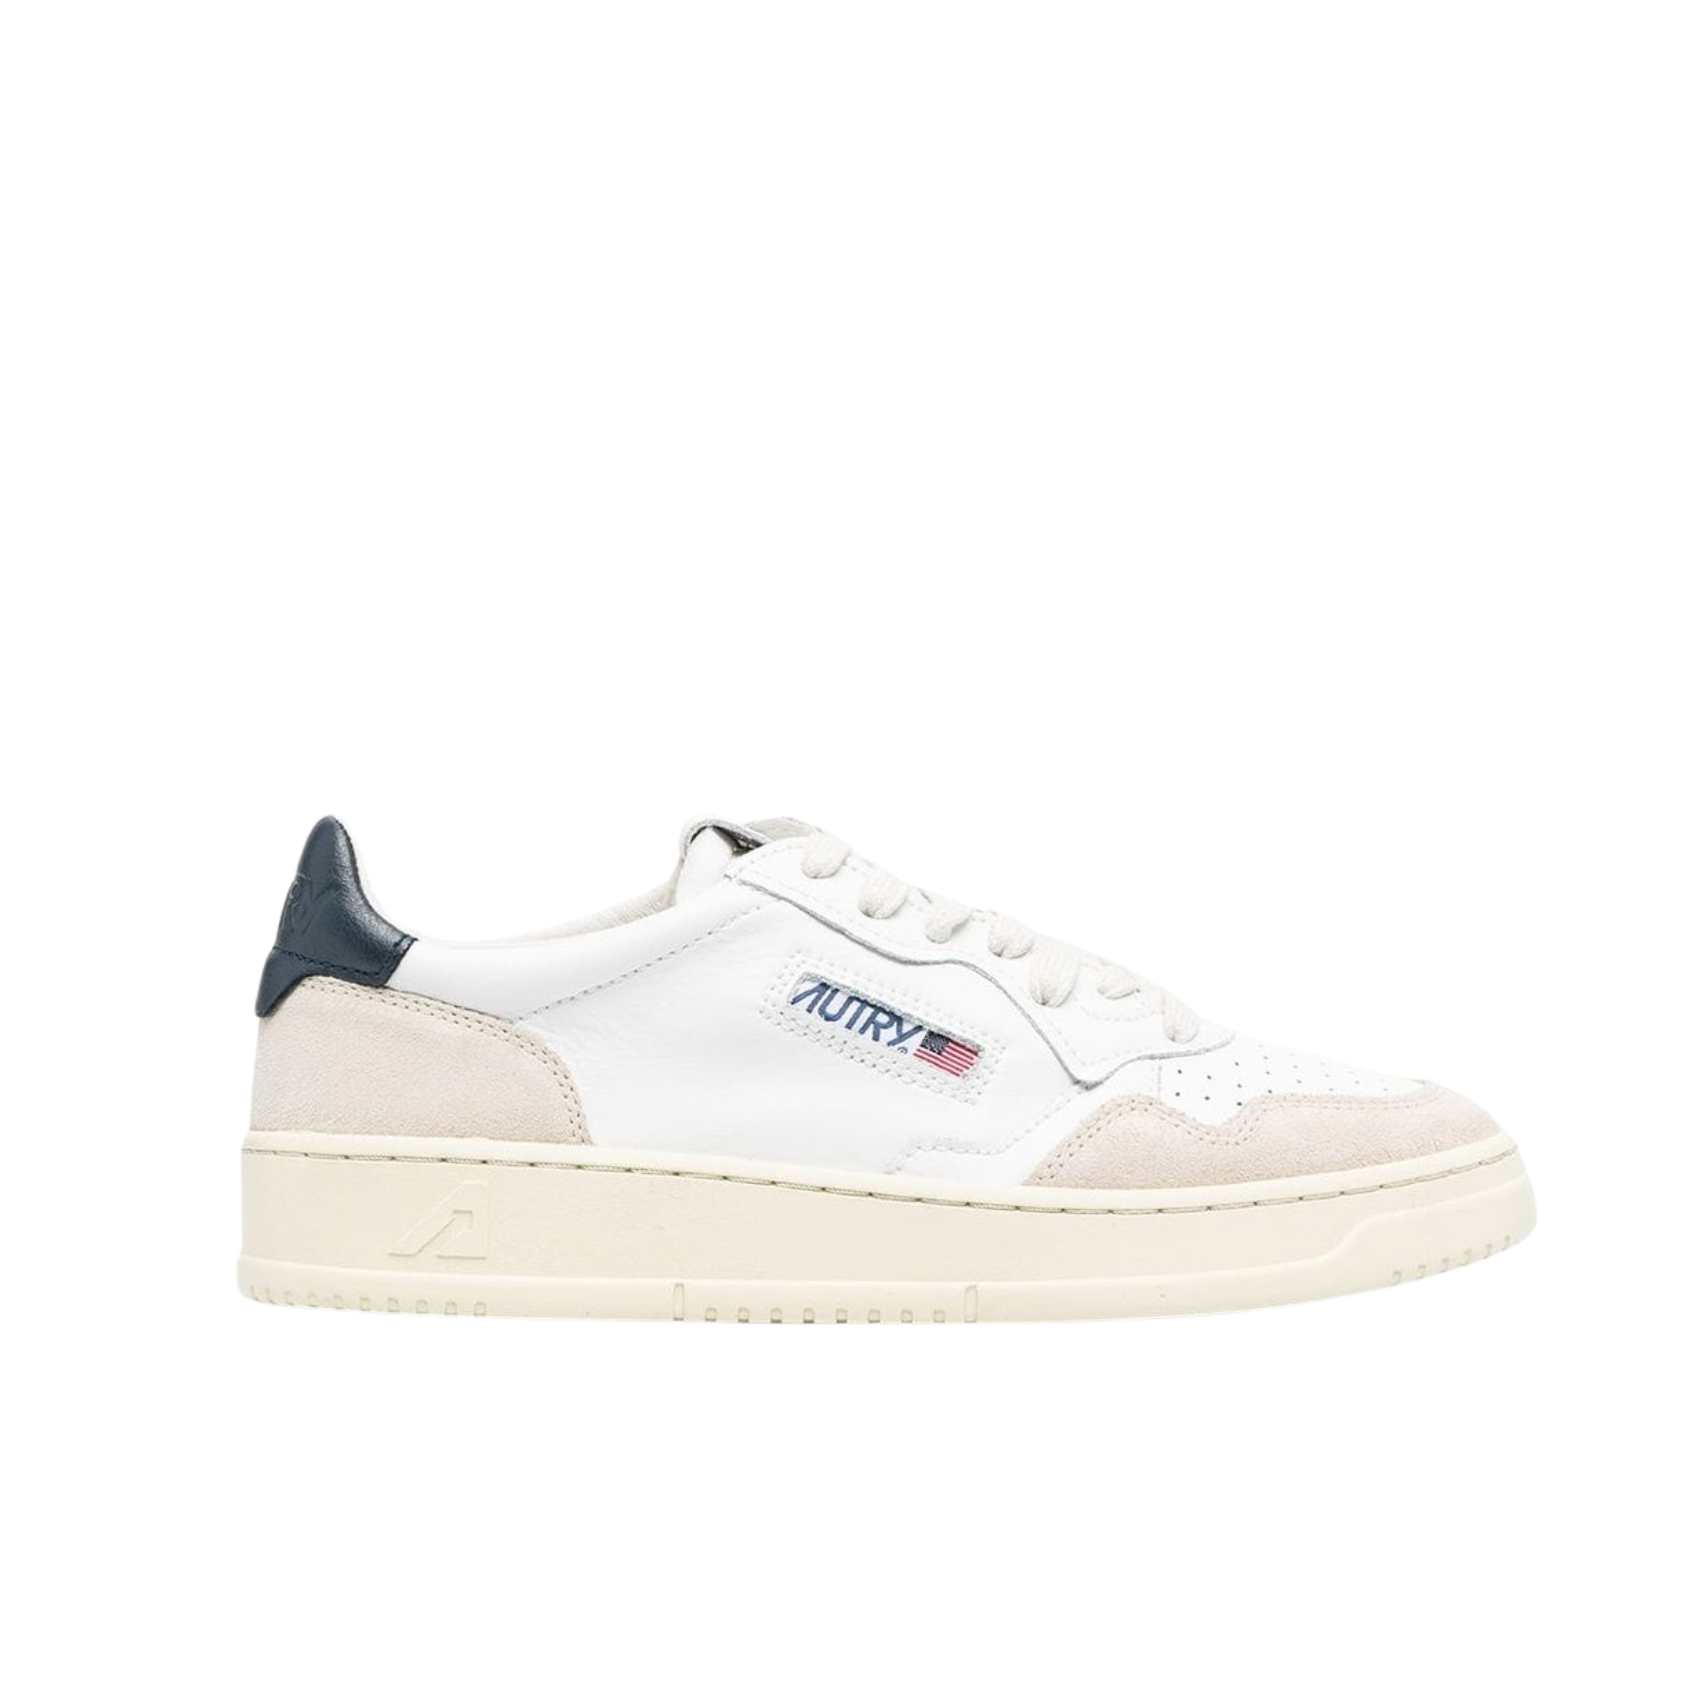 Autry 01 Low Wom Leat/Suede - White